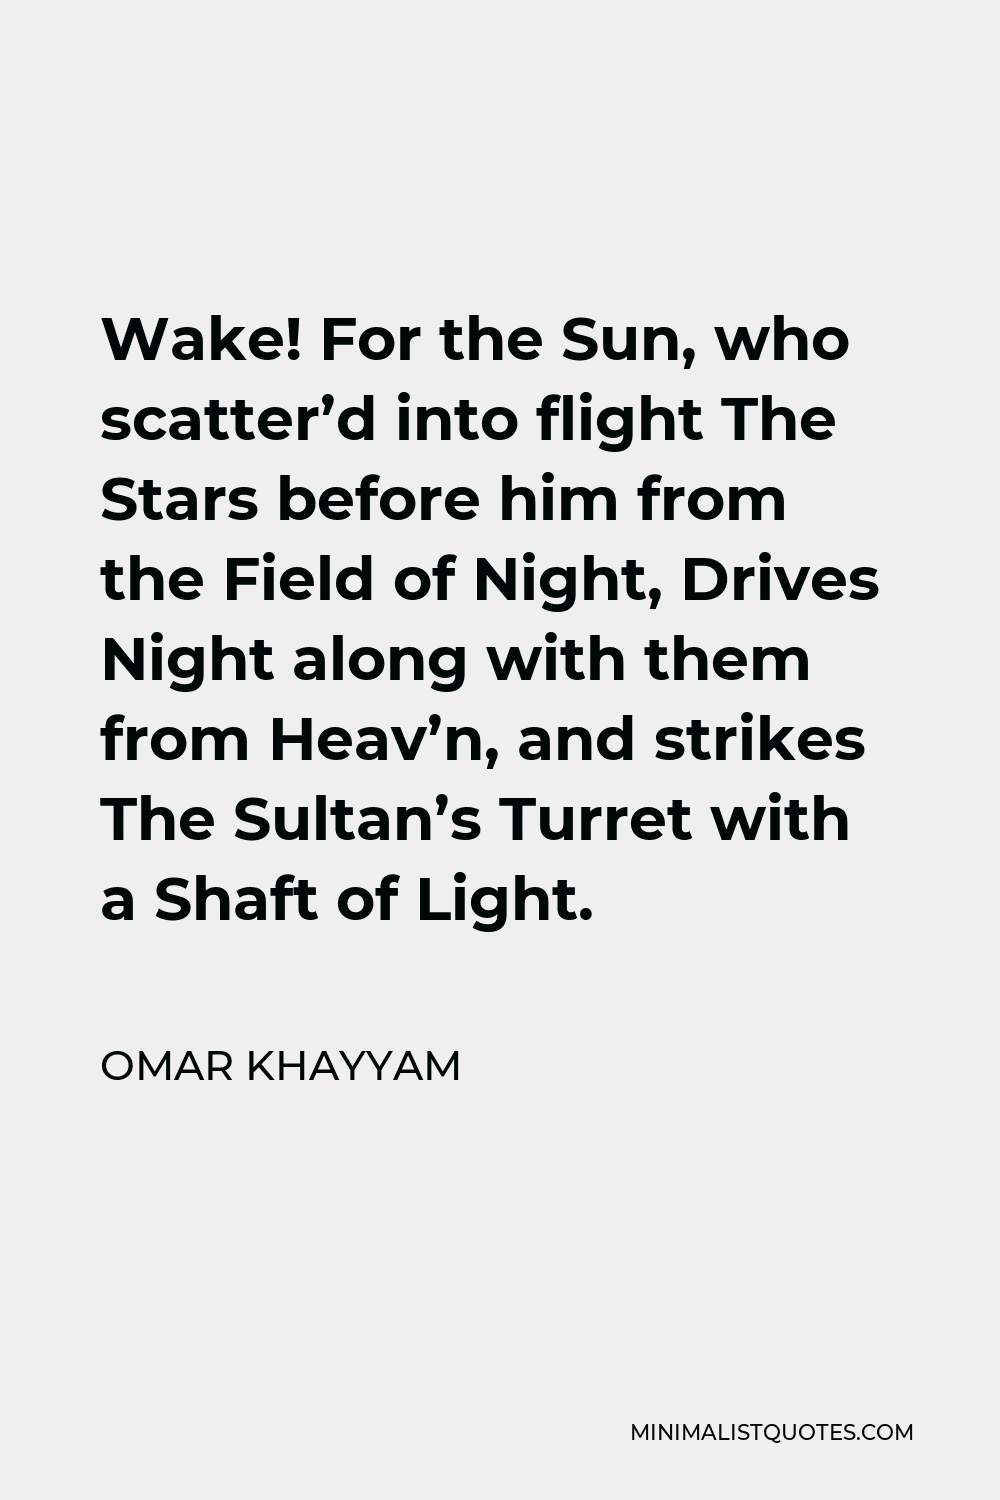 Omar Khayyam Quote - Wake! For the Sun, who scatter’d into flight The Stars before him from the Field of Night, Drives Night along with them from Heav’n, and strikes The Sultan’s Turret with a Shaft of Light.